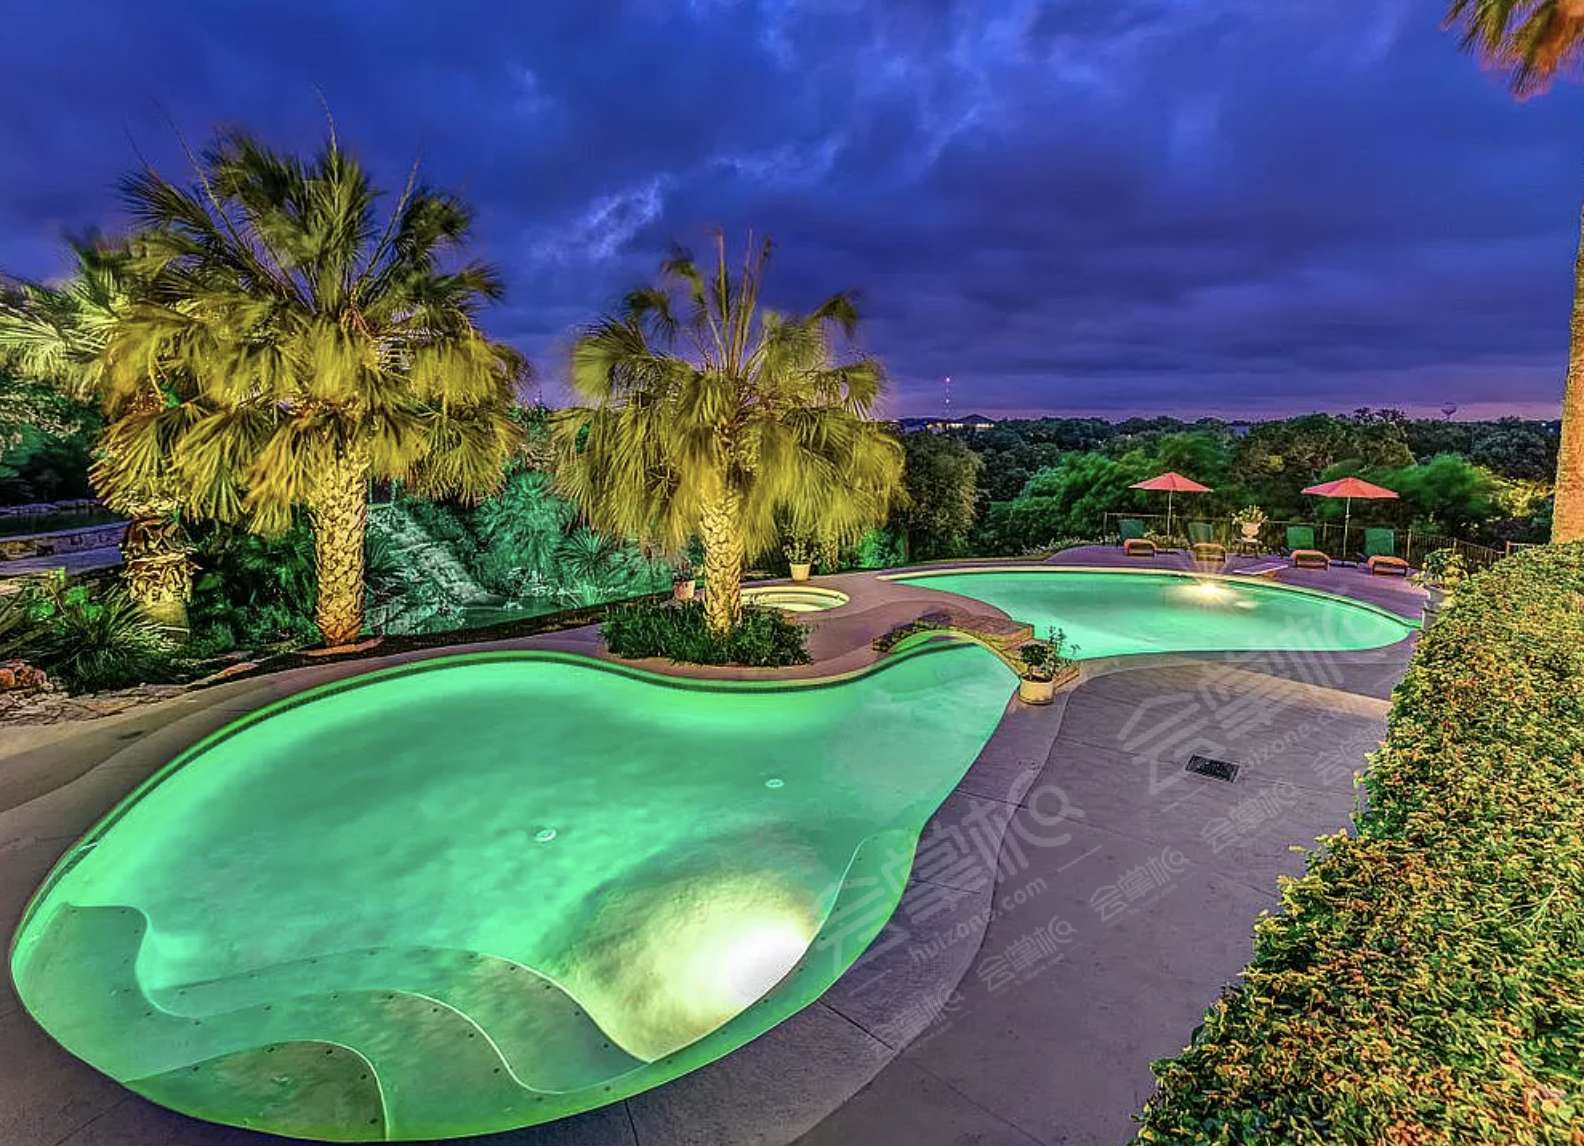 Elevated Mansion with Backyard Event Space: Waterfall, Pickleball, Pool & Outdoor Kitchen